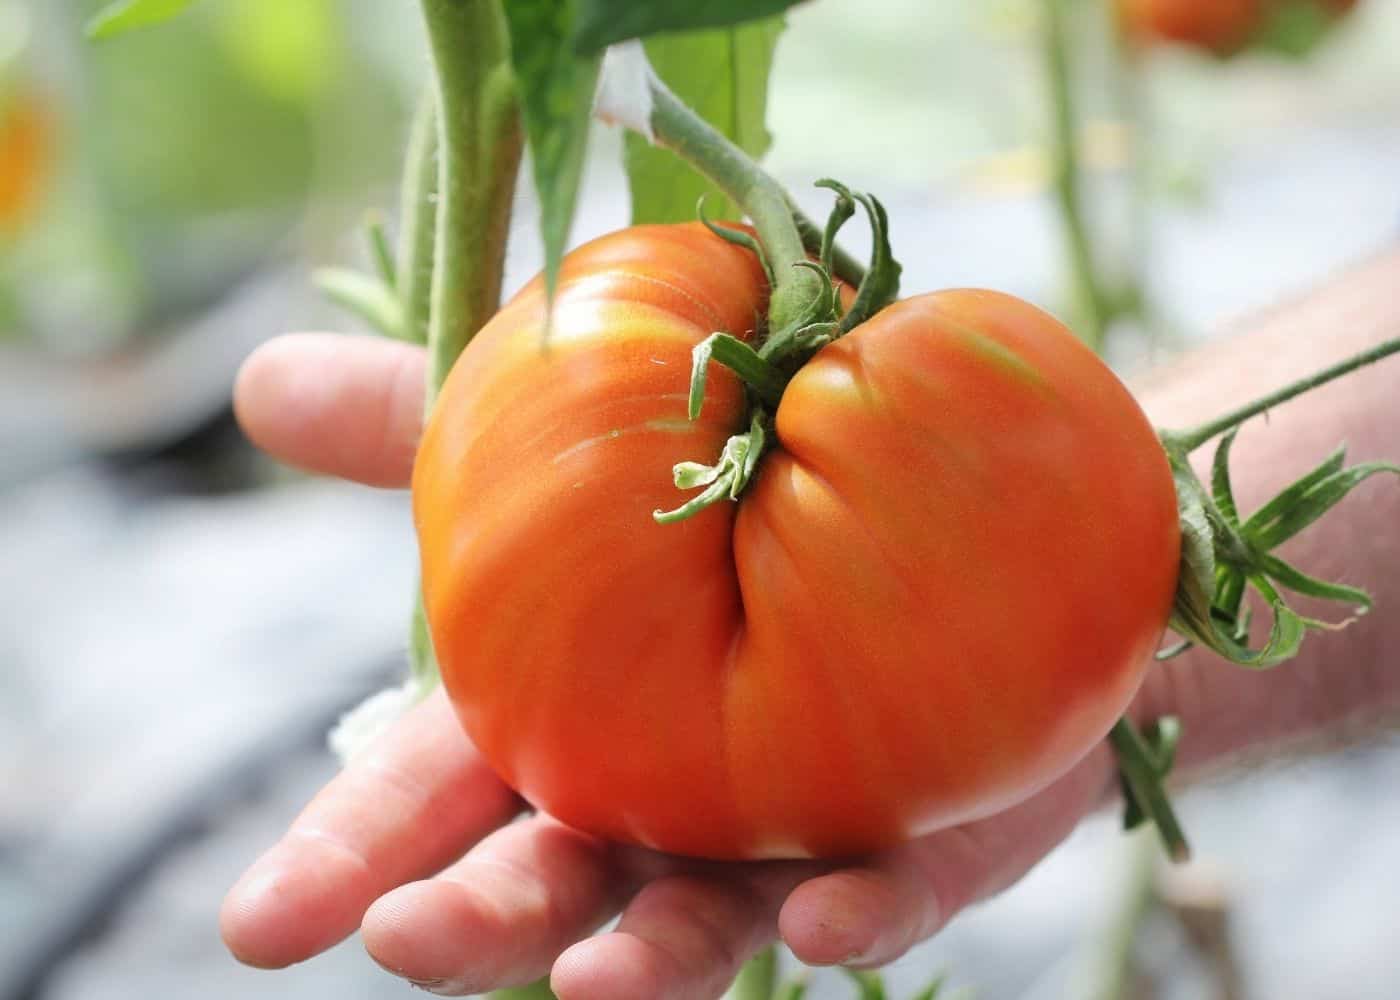 Big Beef: A Must-Have Hybrid Tomato for Professional and Home Gardeners